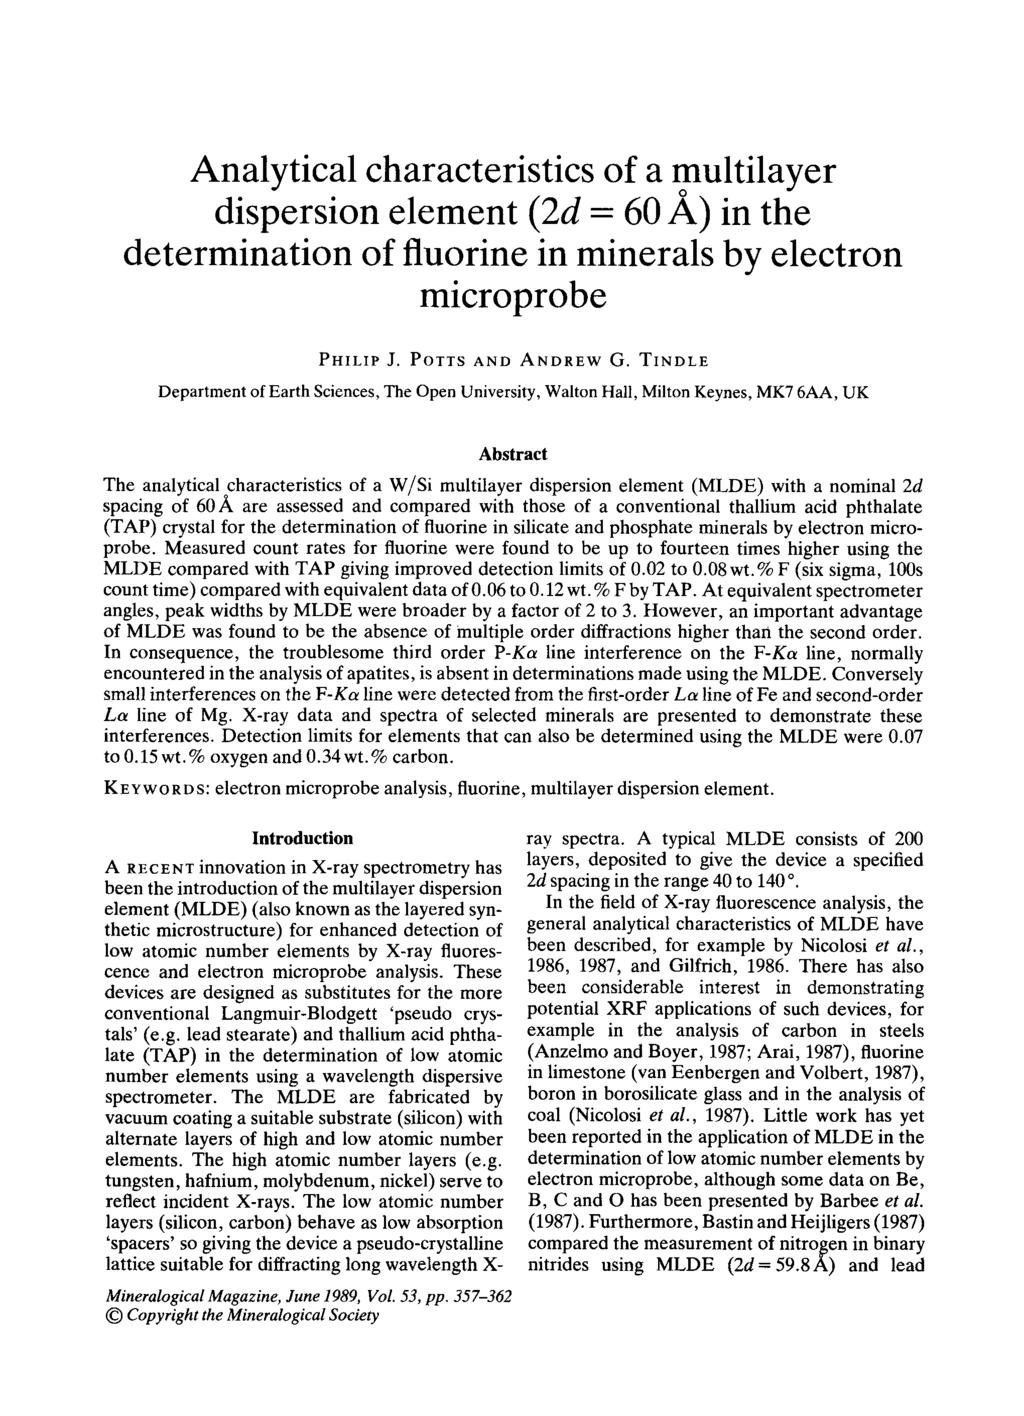 Analytical characteristics of a multilayer dispersion element (2d = 60 A) in the determination of fluorine in minerals by electron microprobe PHILIP J. POTTS AND ANDREW G.